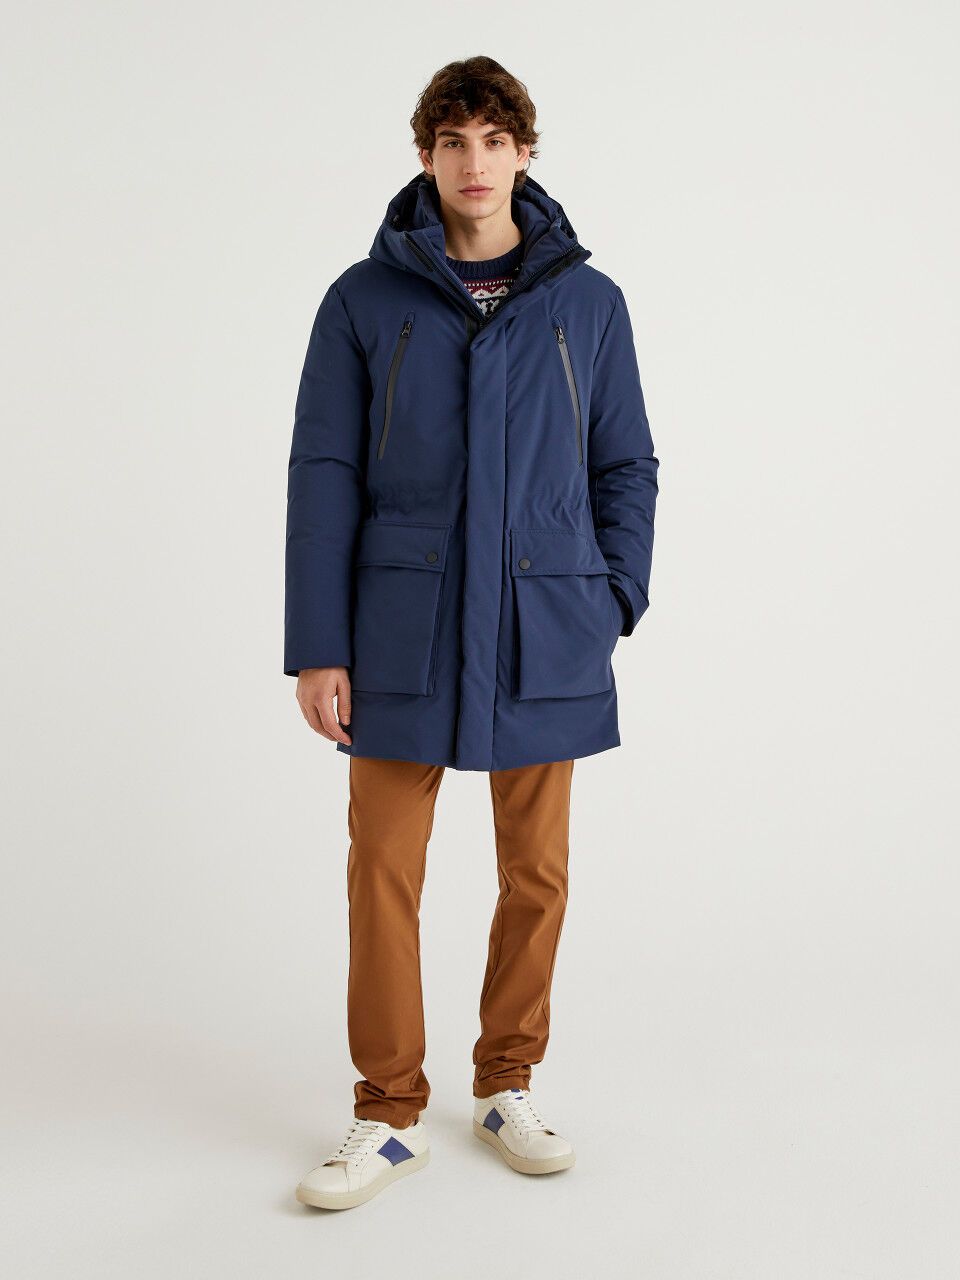 Men's Coats and Jackets Collection 2022 | Benetton